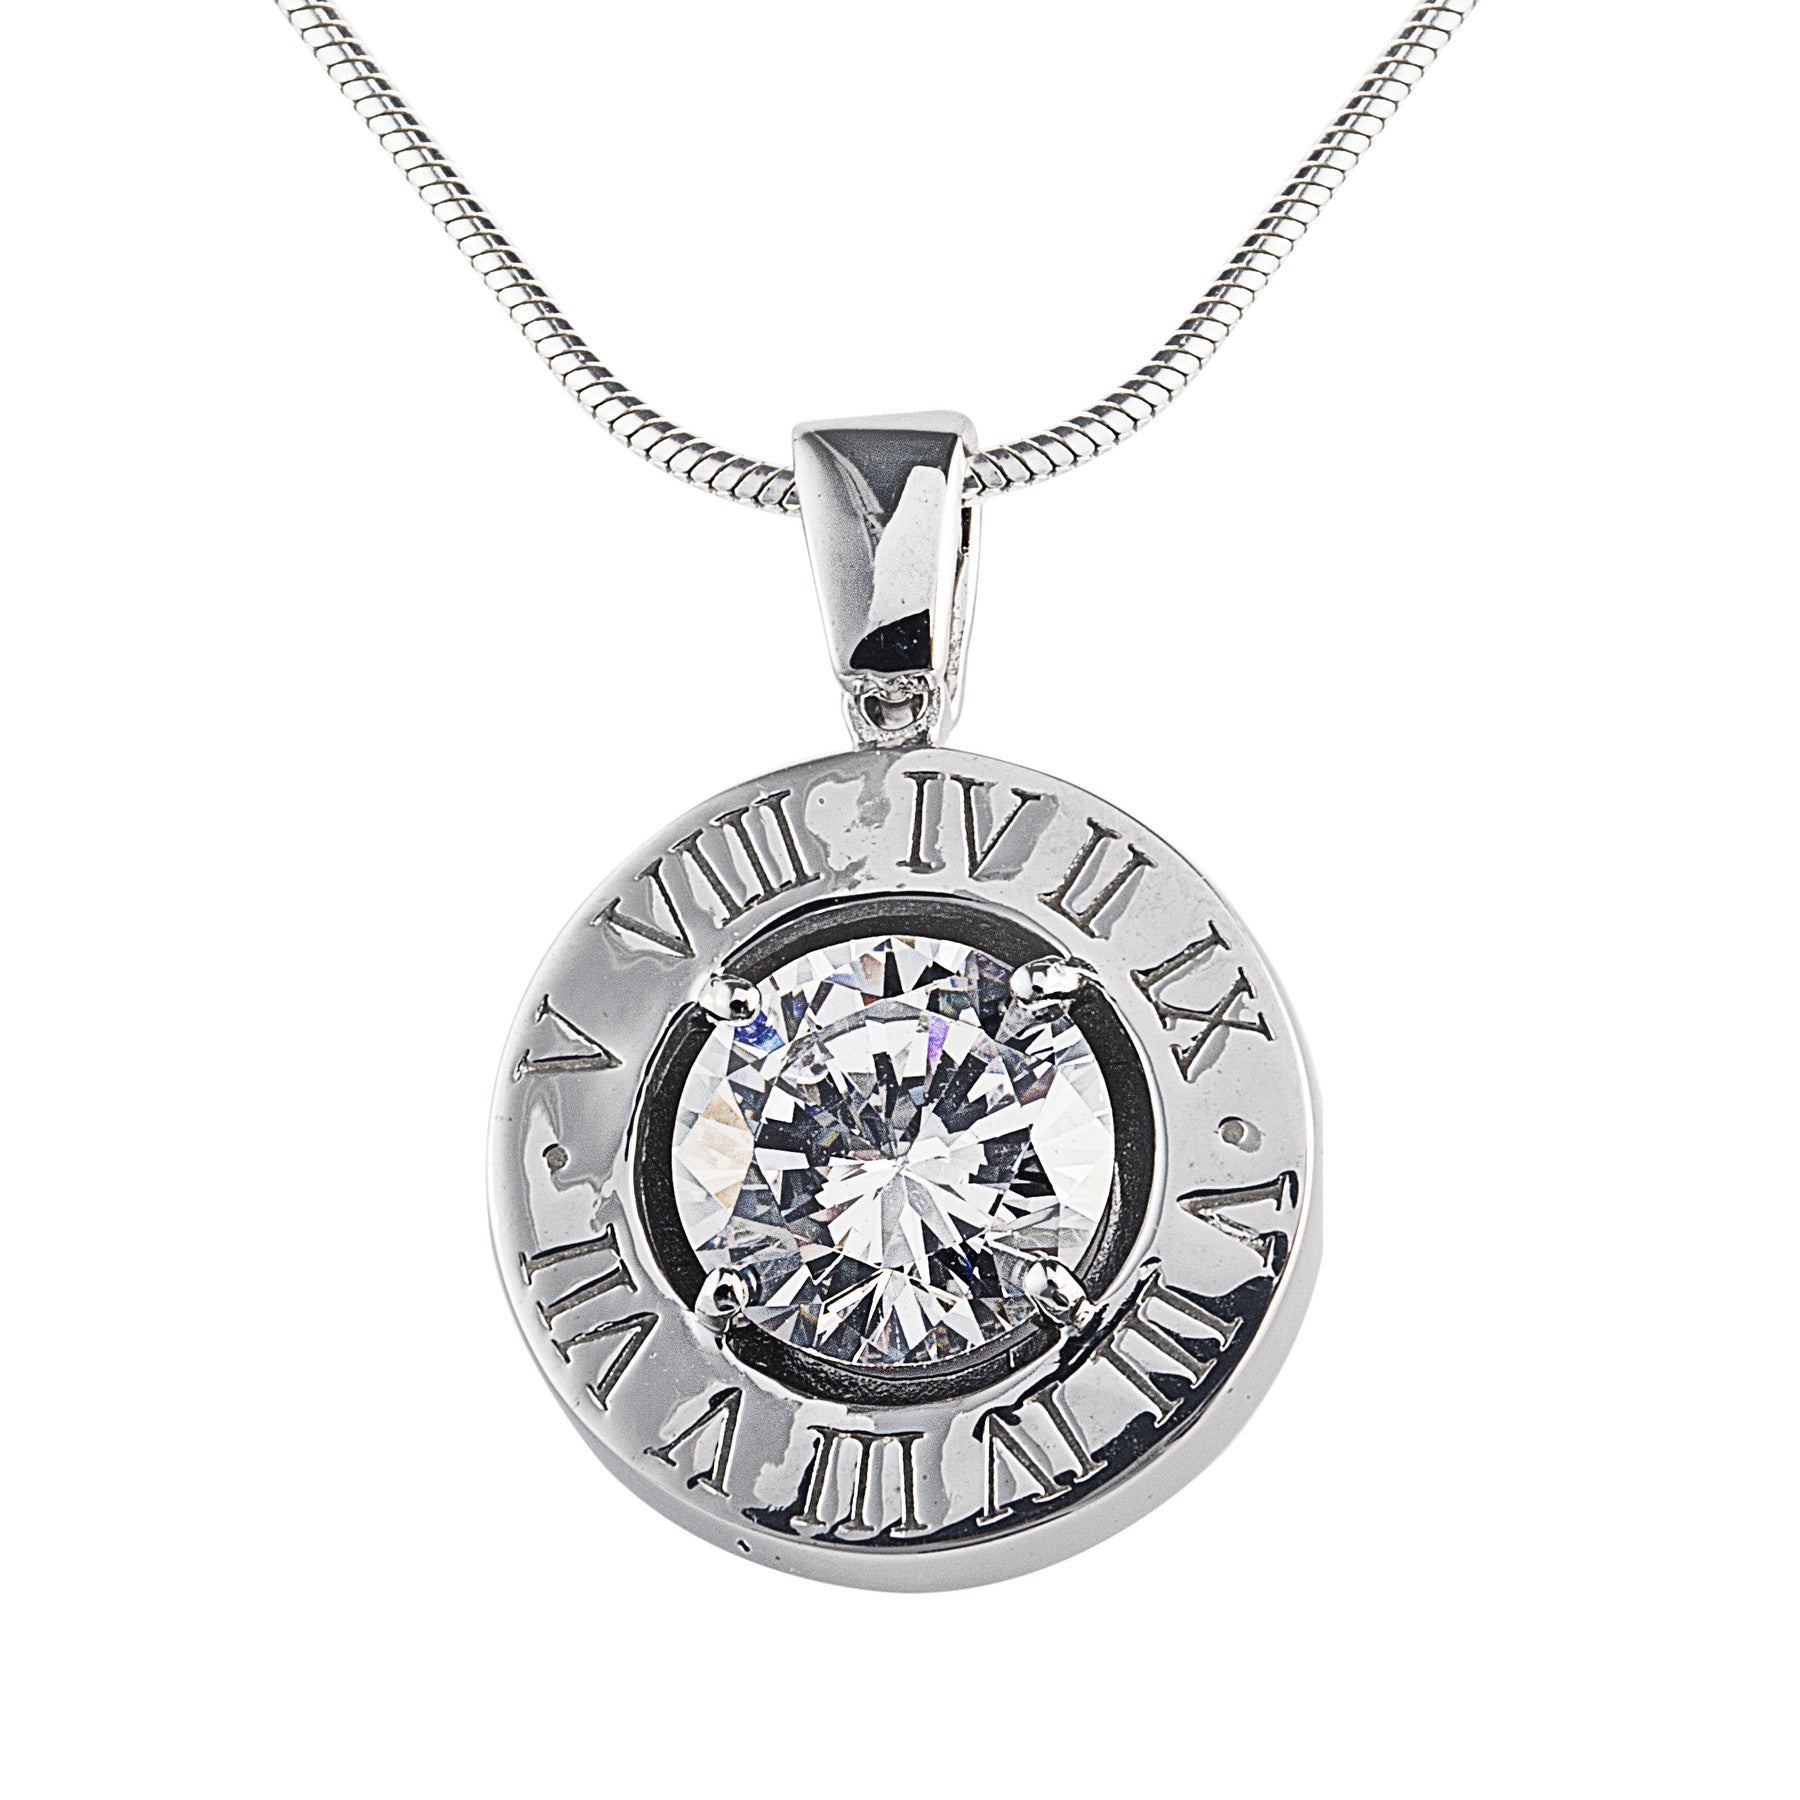 The lovely Eden Stone Necklace in 925 Sterling Silver features a stunning 2-carat cubic zirconia stone surrounded by our signature Roman numerals. Matching rings and earrings are available. Affordable luxury jewellery by Bellagio & Co. Worldwide shipping plus FREE shipping for orders over $150 in Australia.